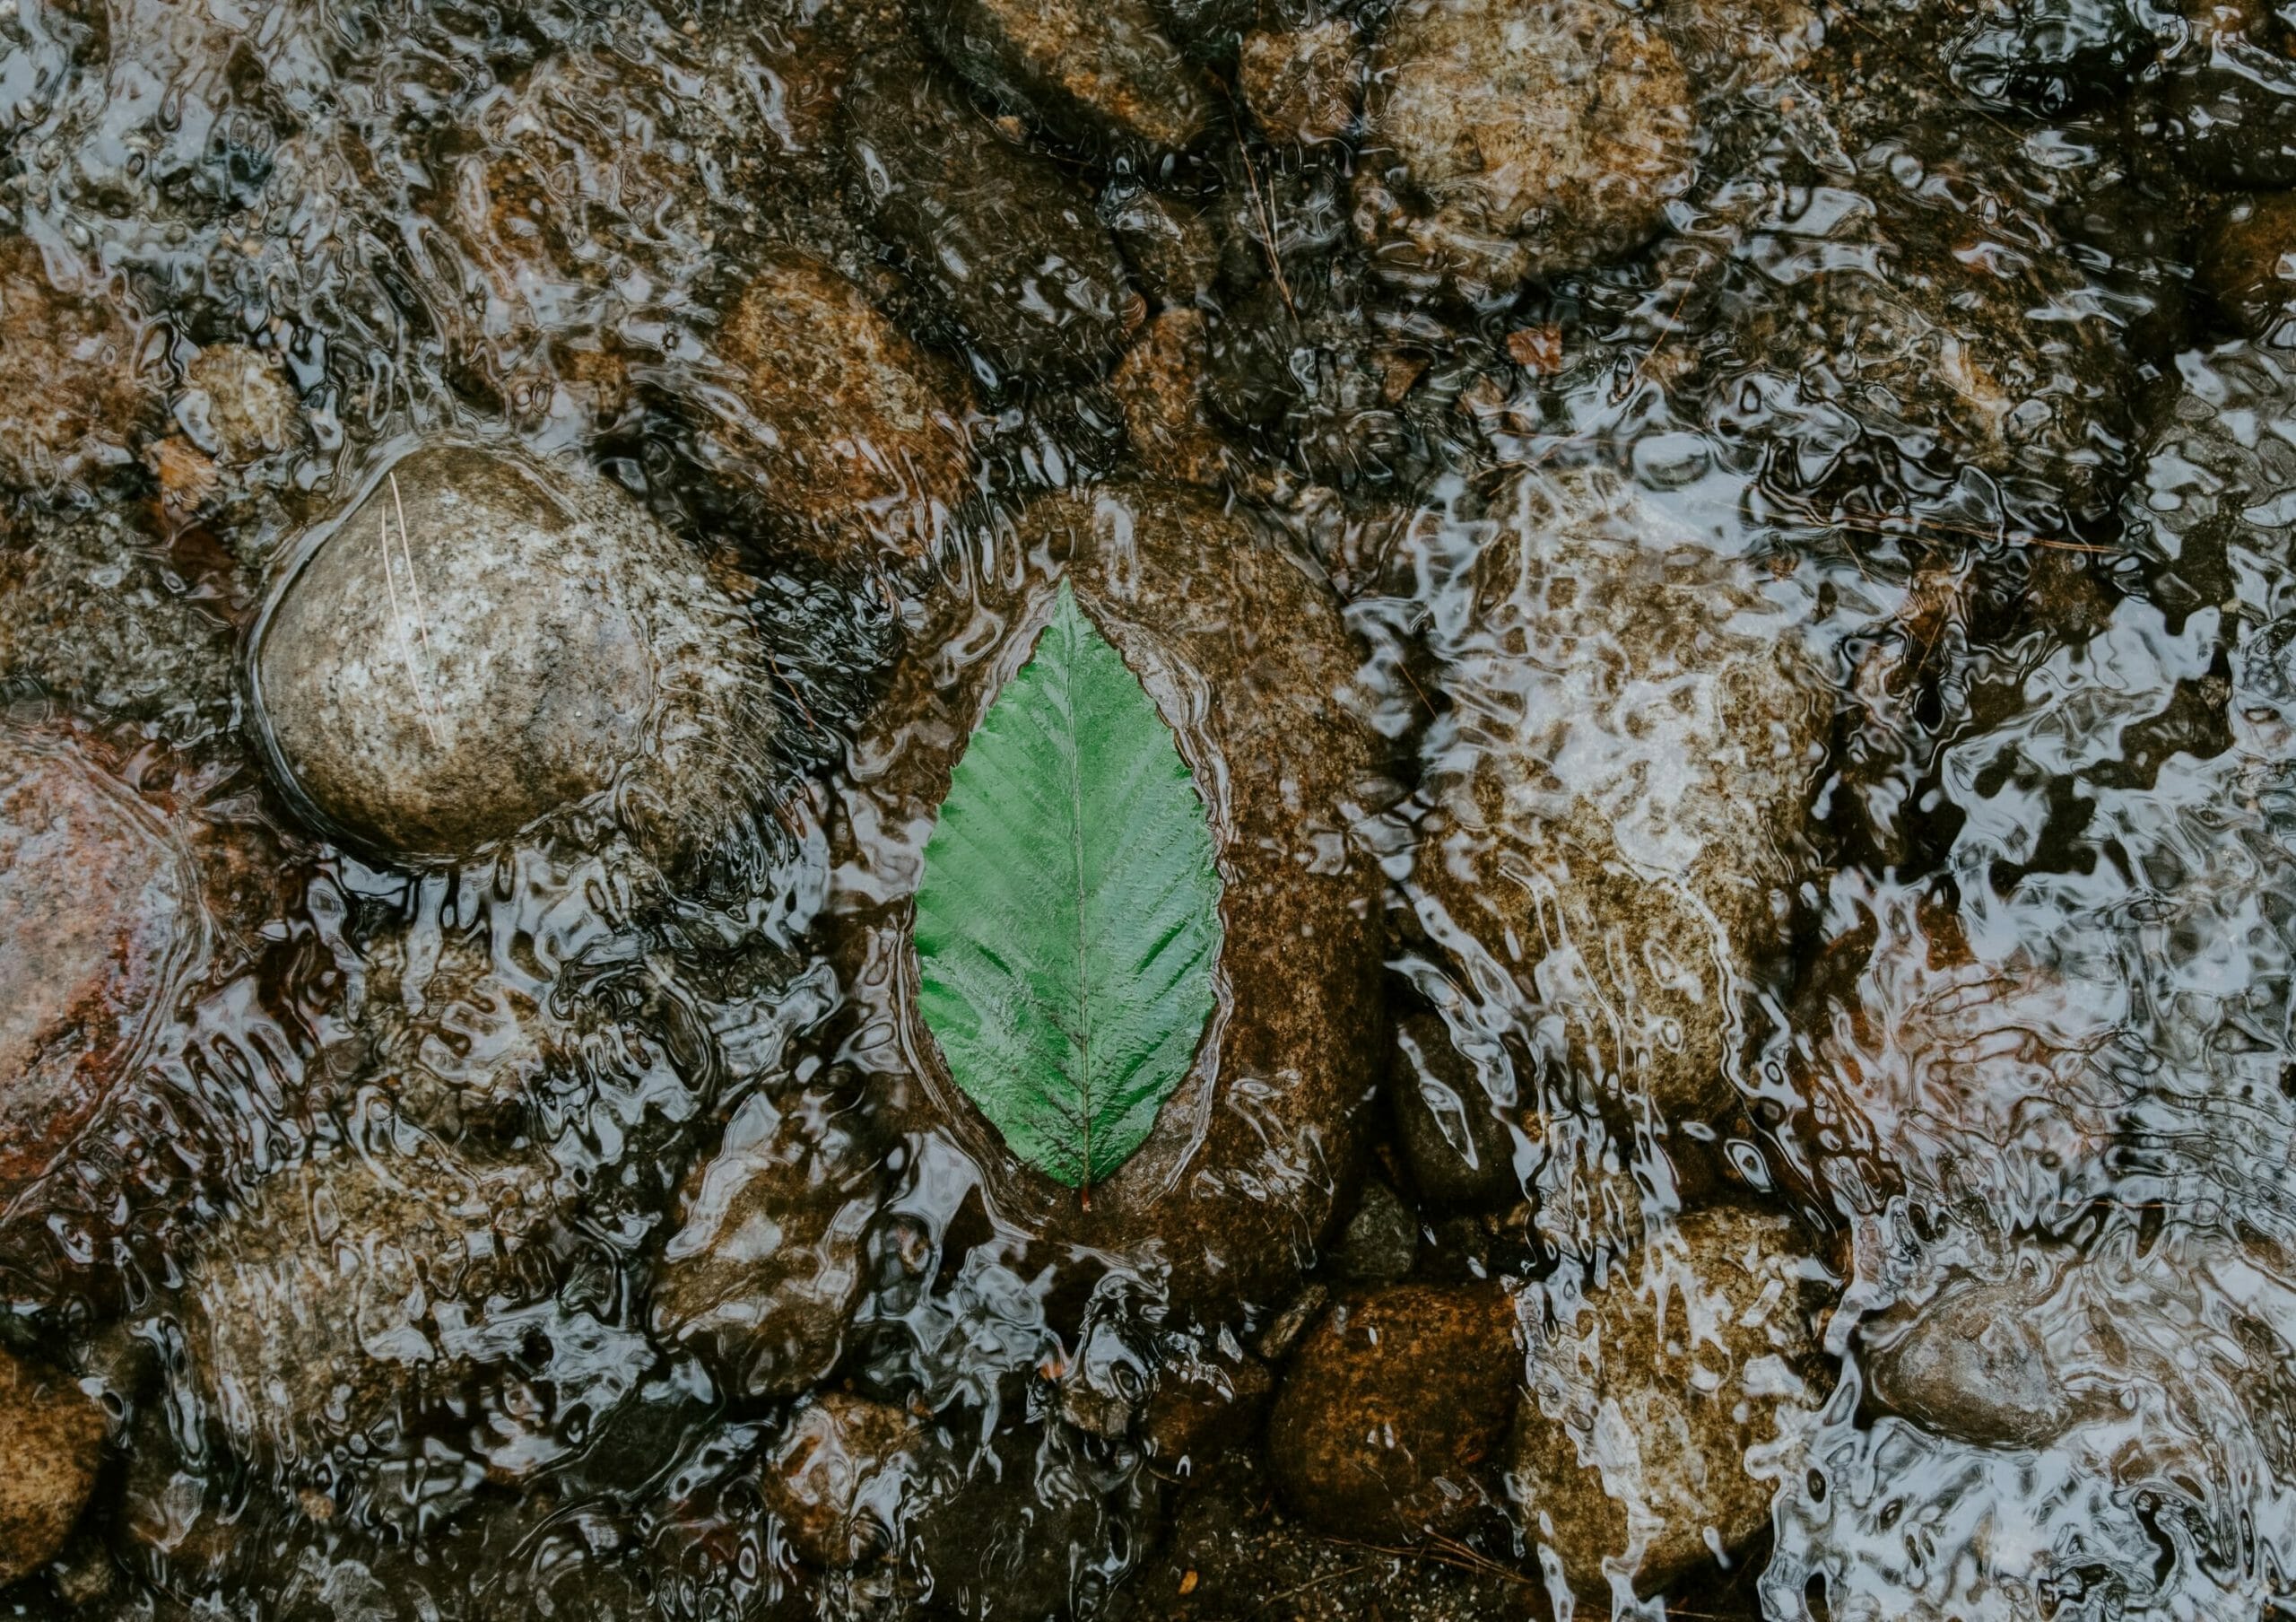 single leaf caught on a rock with water flowing around it